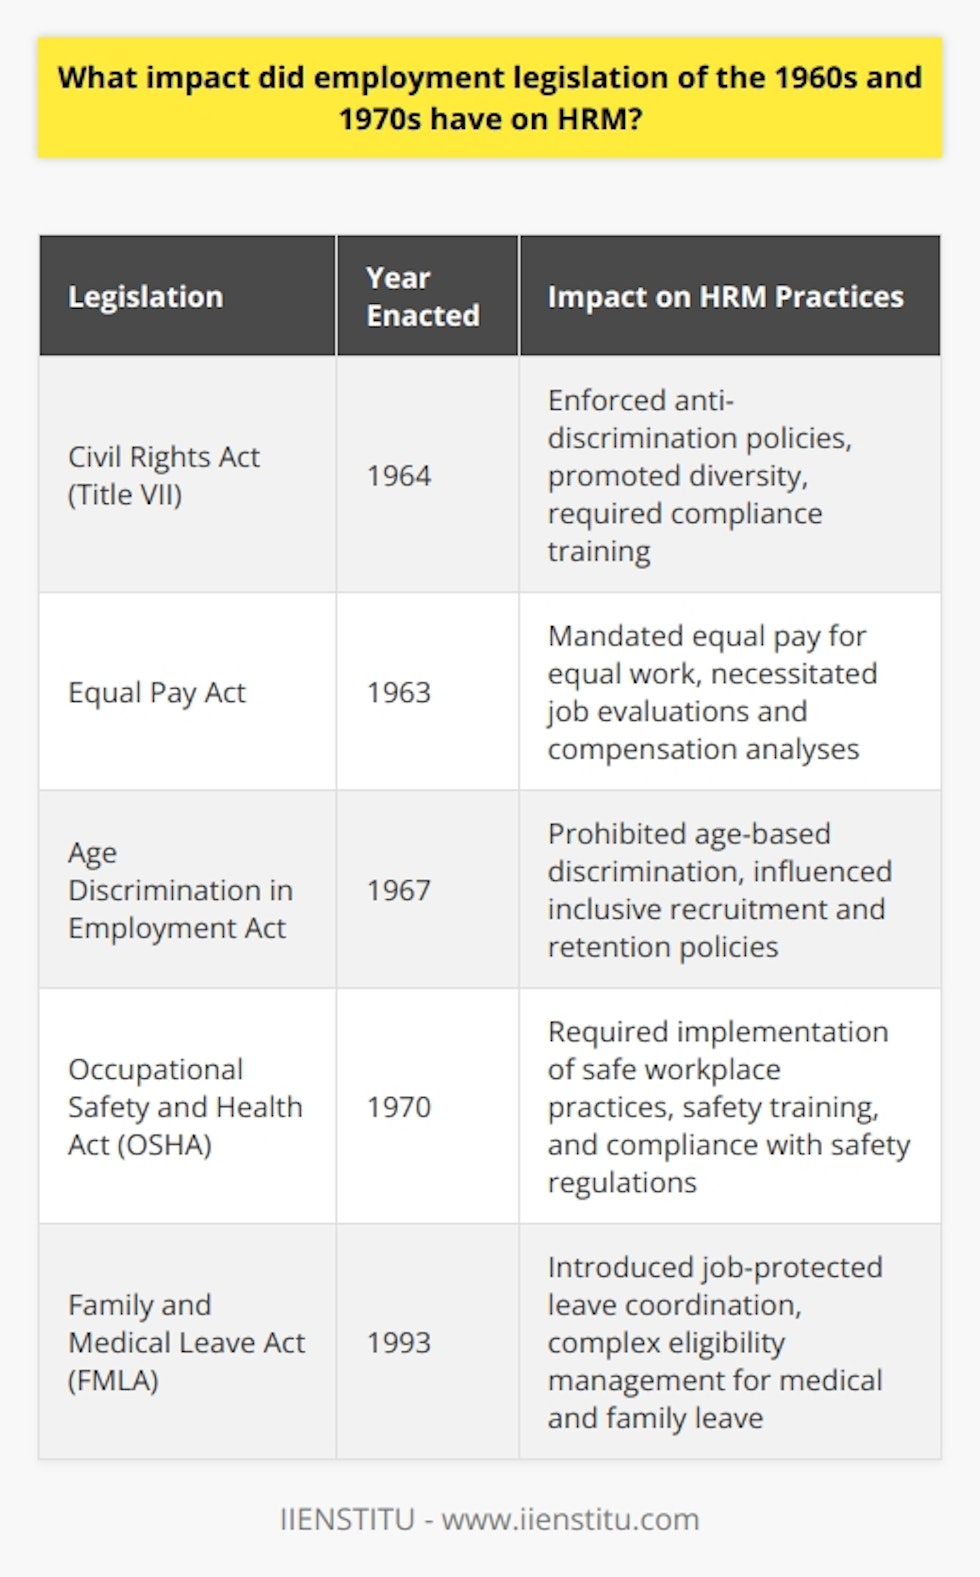 The employment legislation of the 1960s and 1970s heralded a significant transformation in Human Resource Management (HRM) practices. The period was marked by a wave of legislative changes designed to provide workers with more rights and protections while promoting equality and safety in the workplace.One of the seminal pieces of legislation was the Civil Rights Act of 1964, specifically Title VII, which prohibited employment discrimination based on race, color, religion, sex, or national origin. This necessitated that HRM practitioners develop and implement practices that promoted diversity and prevented discrimination. As a result, HRM had to be versed in legal compliance and in the creation of workplace policies that fostered an inclusive culture, as well as in training managers and employees on non-discriminatory practices.The introduction of the Equal Pay Act of 1963 played a critical role in promoting gender equality within the workforce. It required HRM professionals to evaluate and adjust their compensation systems, ensuring that men and women received equal pay for equal work. This led to more structured job evaluations and compensation analysis, to mitigate wage disparities.Furthermore, the Age Discrimination in Employment Act of 1967 protected workers aged 40 and older from discrimination based on their age. HRM needed to ensure that recruitment, retention, and retirement policies were not only inclusive but also did not indirectly discriminate against older employees.The Occupational Safety and Health Act of 1970 (OSHA) is another legislative milestone that informed HRM procedures. With the aim of ensuring a safe working environment, OSHA compelled organizations to adhere to specific safety standards. HRM became responsible for the development of safety programs, regular safety training, prompt addressing of hazards, and compliance with federal safety regulations. It also necessitated the recording and reporting of workplace injuries and illnesses.Moreover, the Family and Medical Leave Act (FMLA) of 1993, although slightly outside the time frame, was rooted in the momentum of this era. It required HR managers to navigate complex eligibility requirements and coordinate leaves of absence, affecting how organizations managed job-protected leave for qualifying medical and family reasons.HRM, which had traditionally been focused on administrative tasks, shifted towards a more strategic role, emphasizing employee welfare, fairness in labor practices, and legal compliance. Documentation and record-keeping became an integral part of HRM, as did the role of HR professionals in mediating disputes and facilitating communication between employees and management.It is also important to recognize that this period saw the burgeoning field of HR education and professional development. Institutions like IIENSTITU have leveraged this historical context to inform their curriculum, teaching evolving HR practices that are cognizant of past legal challenges and geared toward addressing the complexities of modern workplaces.In essence, the whirlwind of employment legislation in the 1960s and 1970s served as a catalyst for the evolution of HRM from administrative gatekeeper to strategic partner, shaping the modern landscape of work and labor relations. Today, HRM professionals are integral to navigating the dynamic nexus of employee rights, workplace safety, and diversity, equity, and inclusion – all legacies of this transformative period.